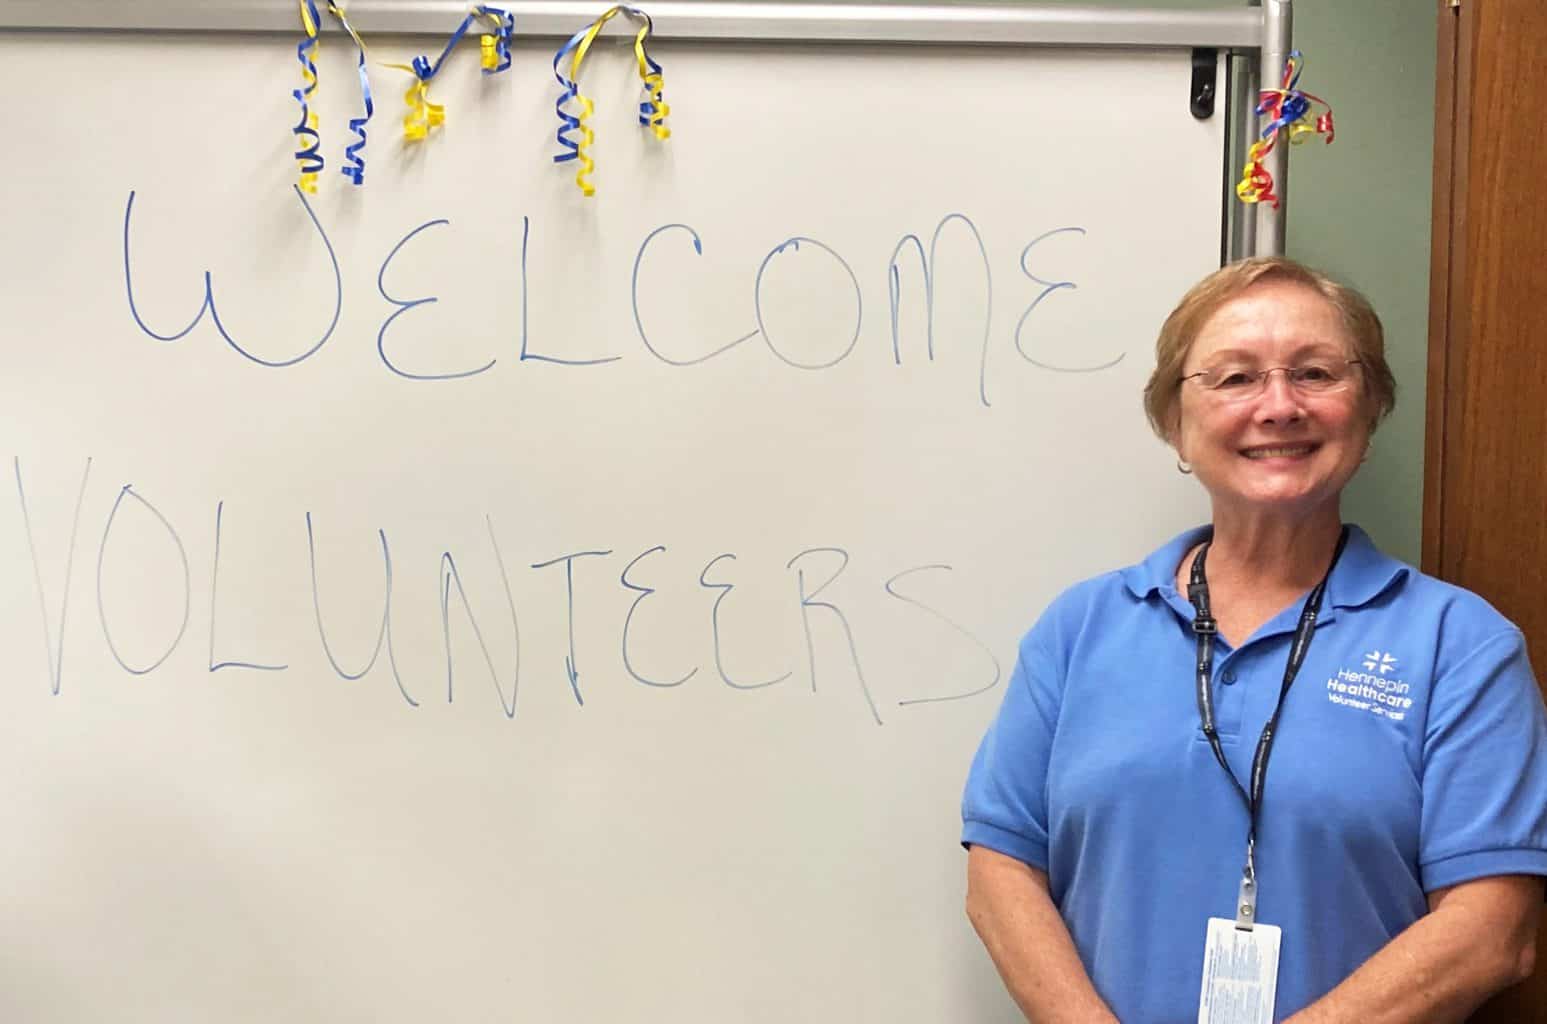 female volunteer smiling in front of board that says welcome